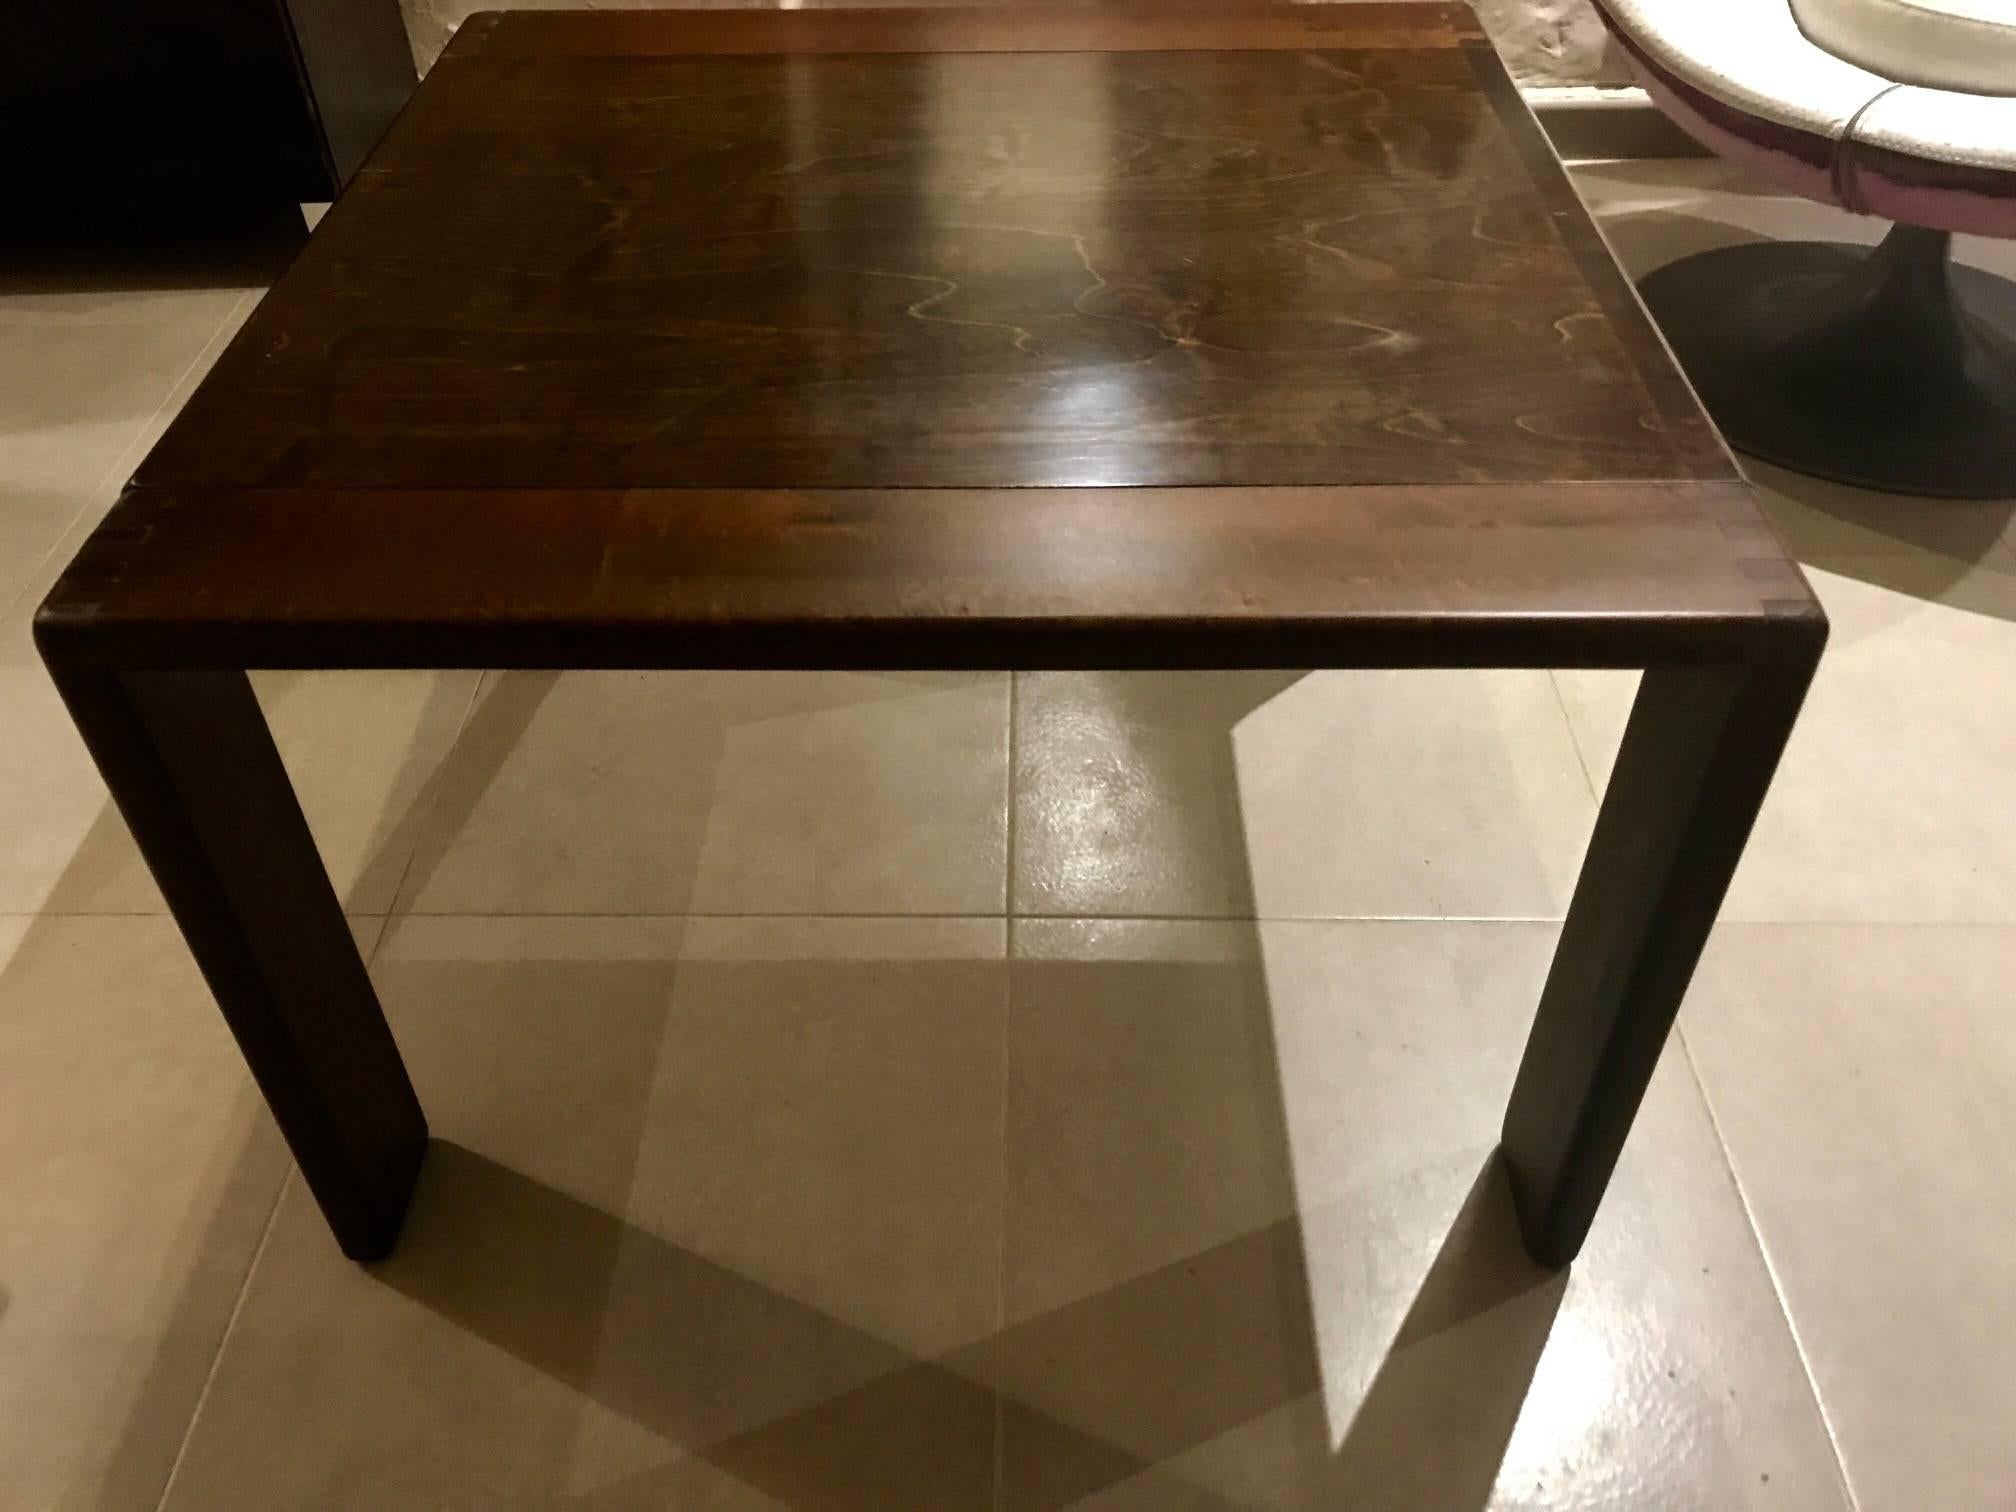 A table manufactured by Asko was designed by Esko Pajamies. It was made in Finland in the 1960s or 1970s.
No restoration!
Little scratch, don't hesitate to ask more photo


Finnish design company Asko was founded in Lahti in 1918 by